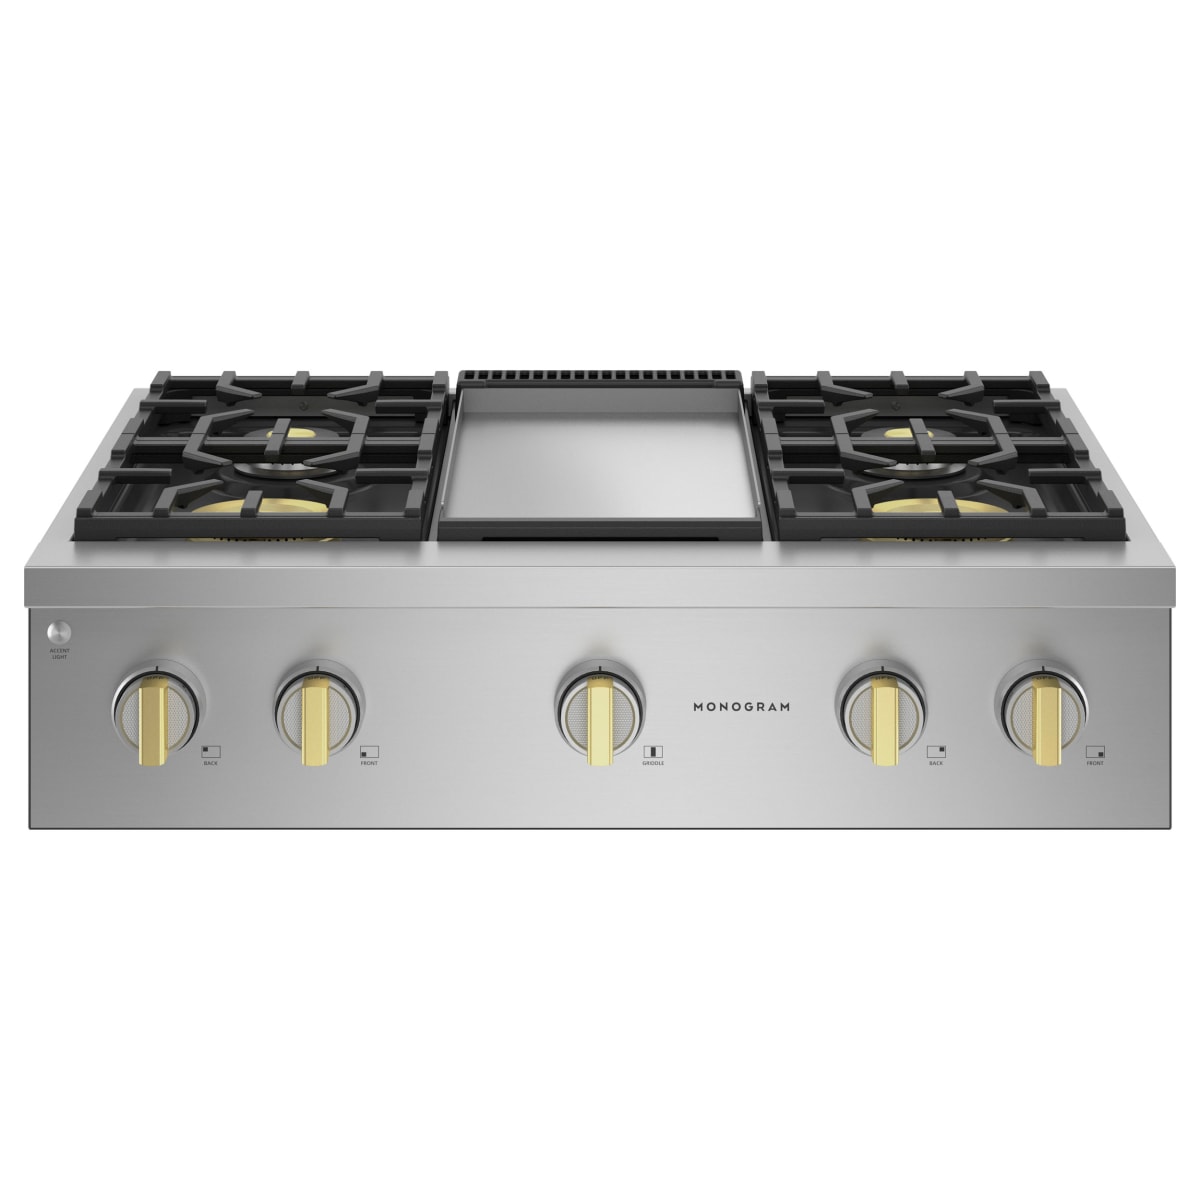 Thermador Professional 36 GAS Rangetop-Stainless Steel-PCG364WD